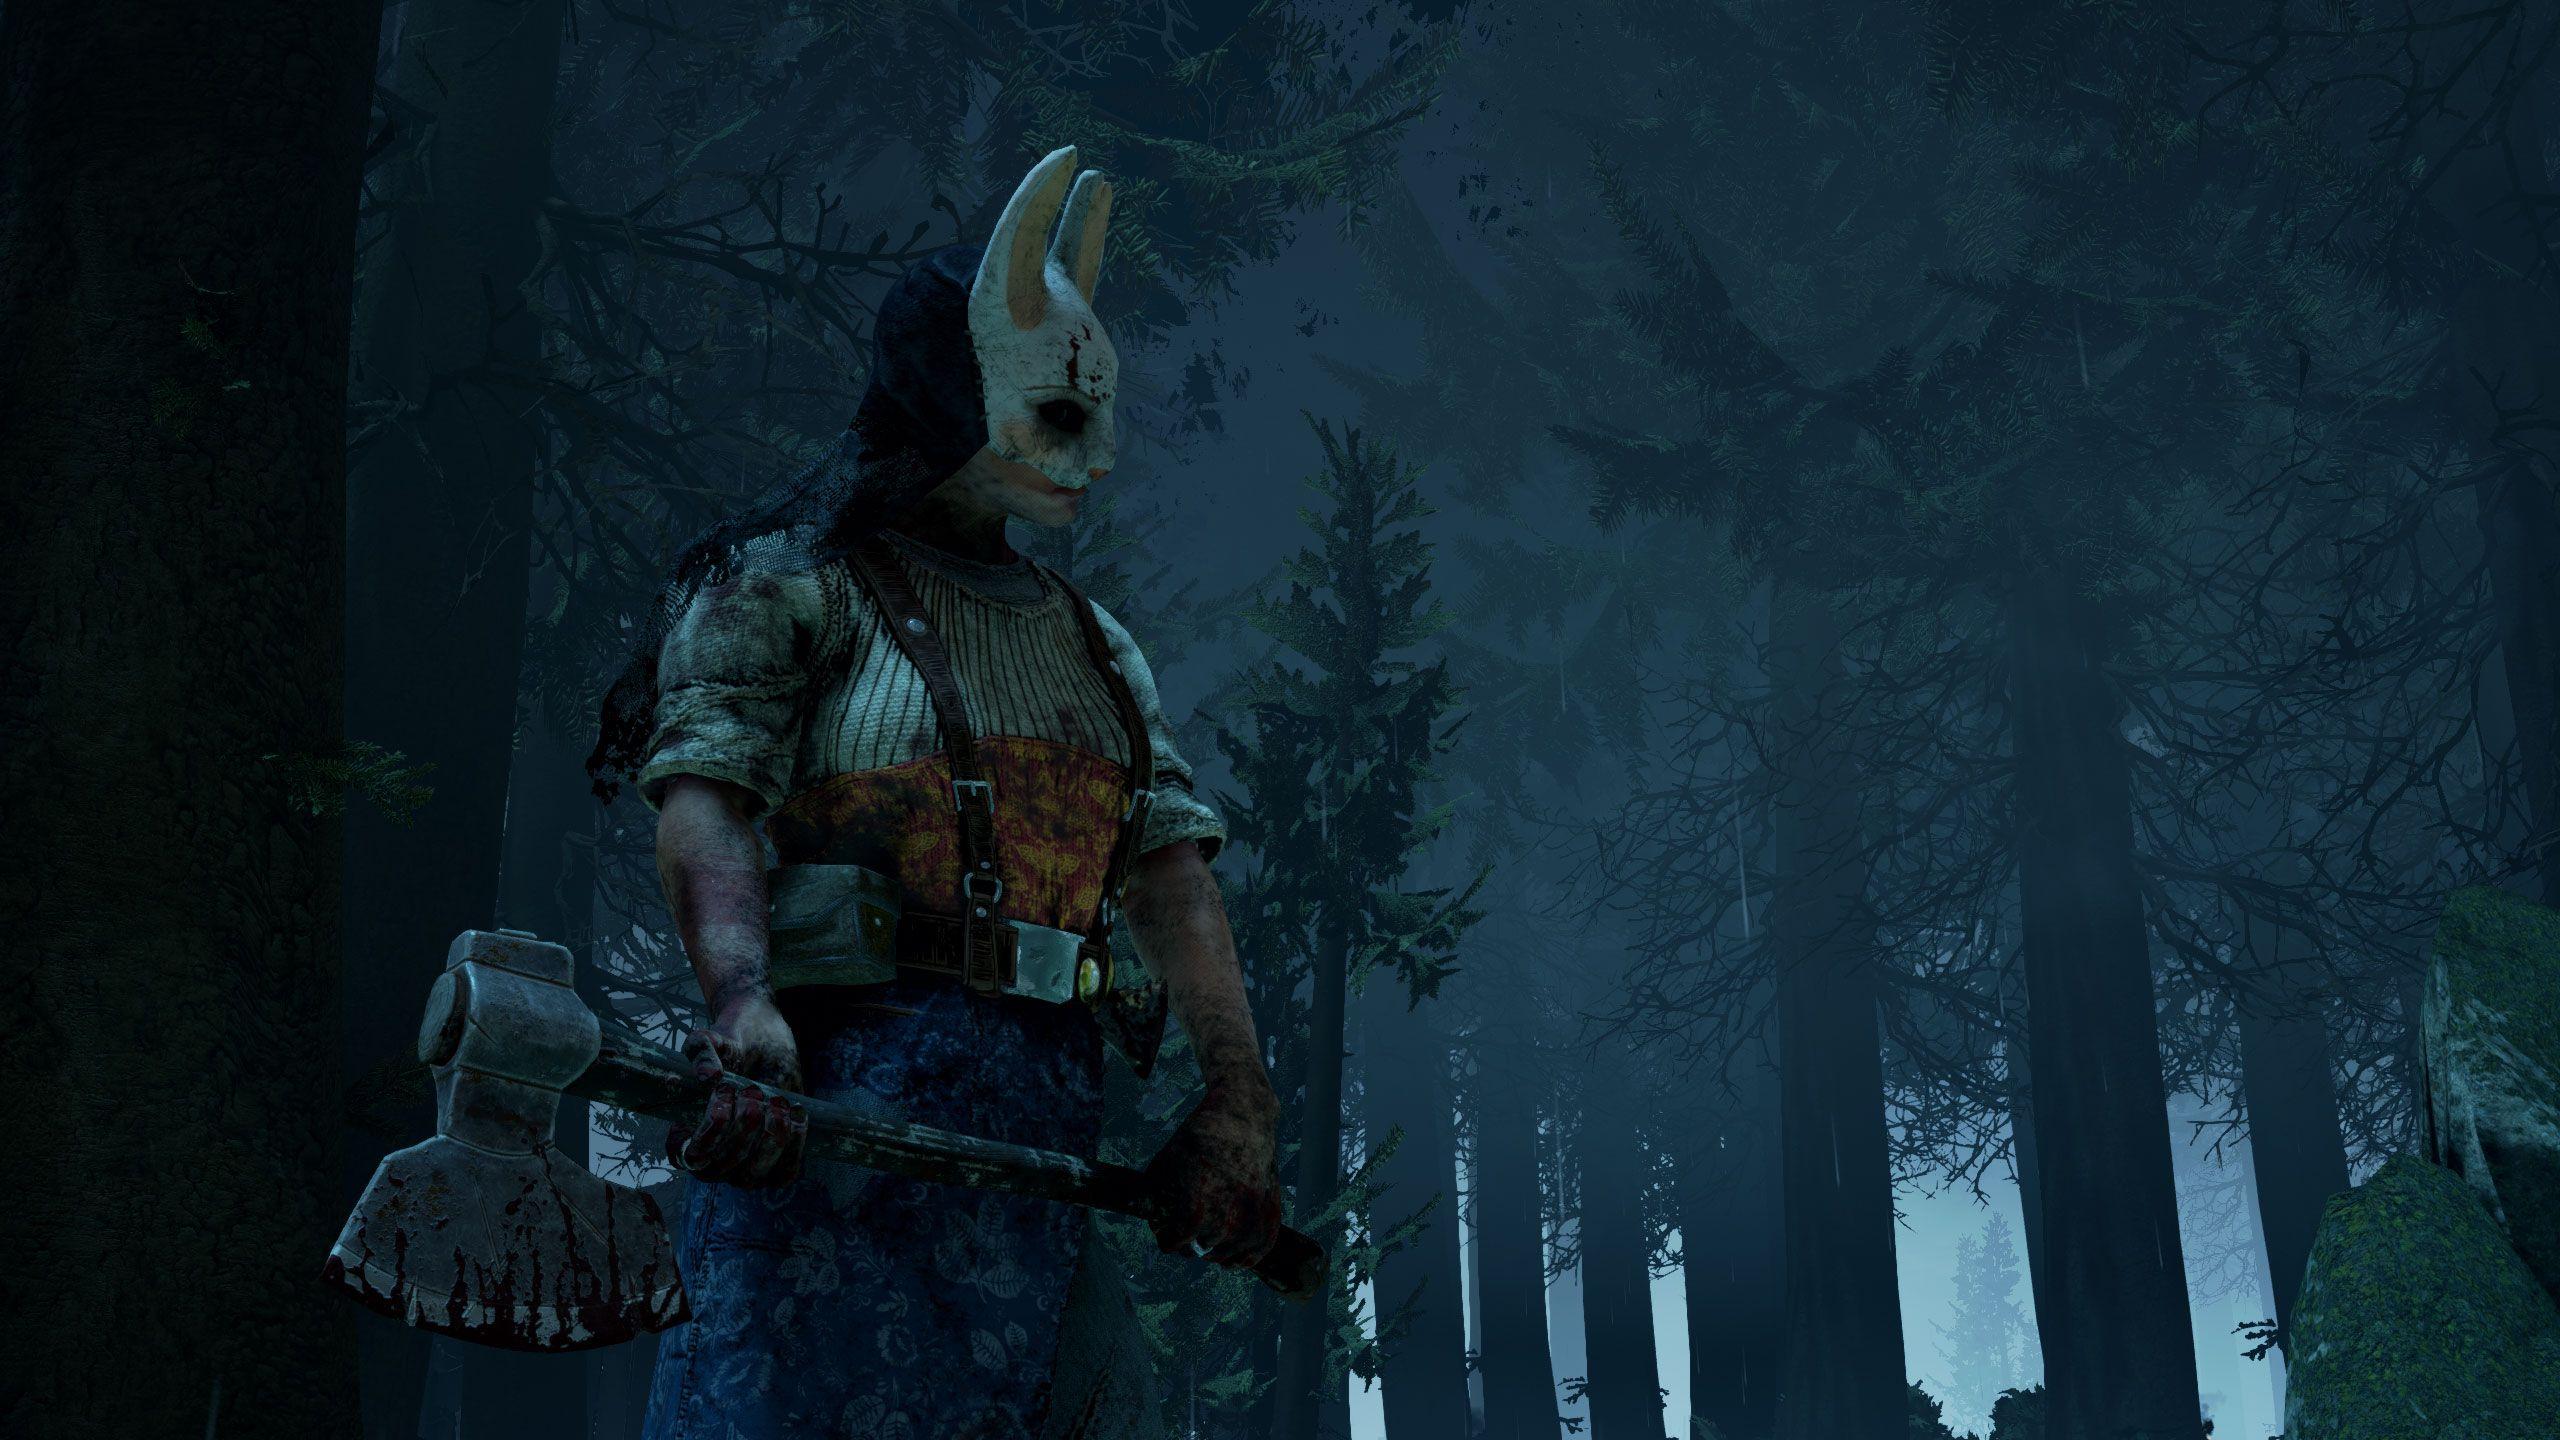 Dead By Daylight” unleashes The Huntress in new chapter, “A